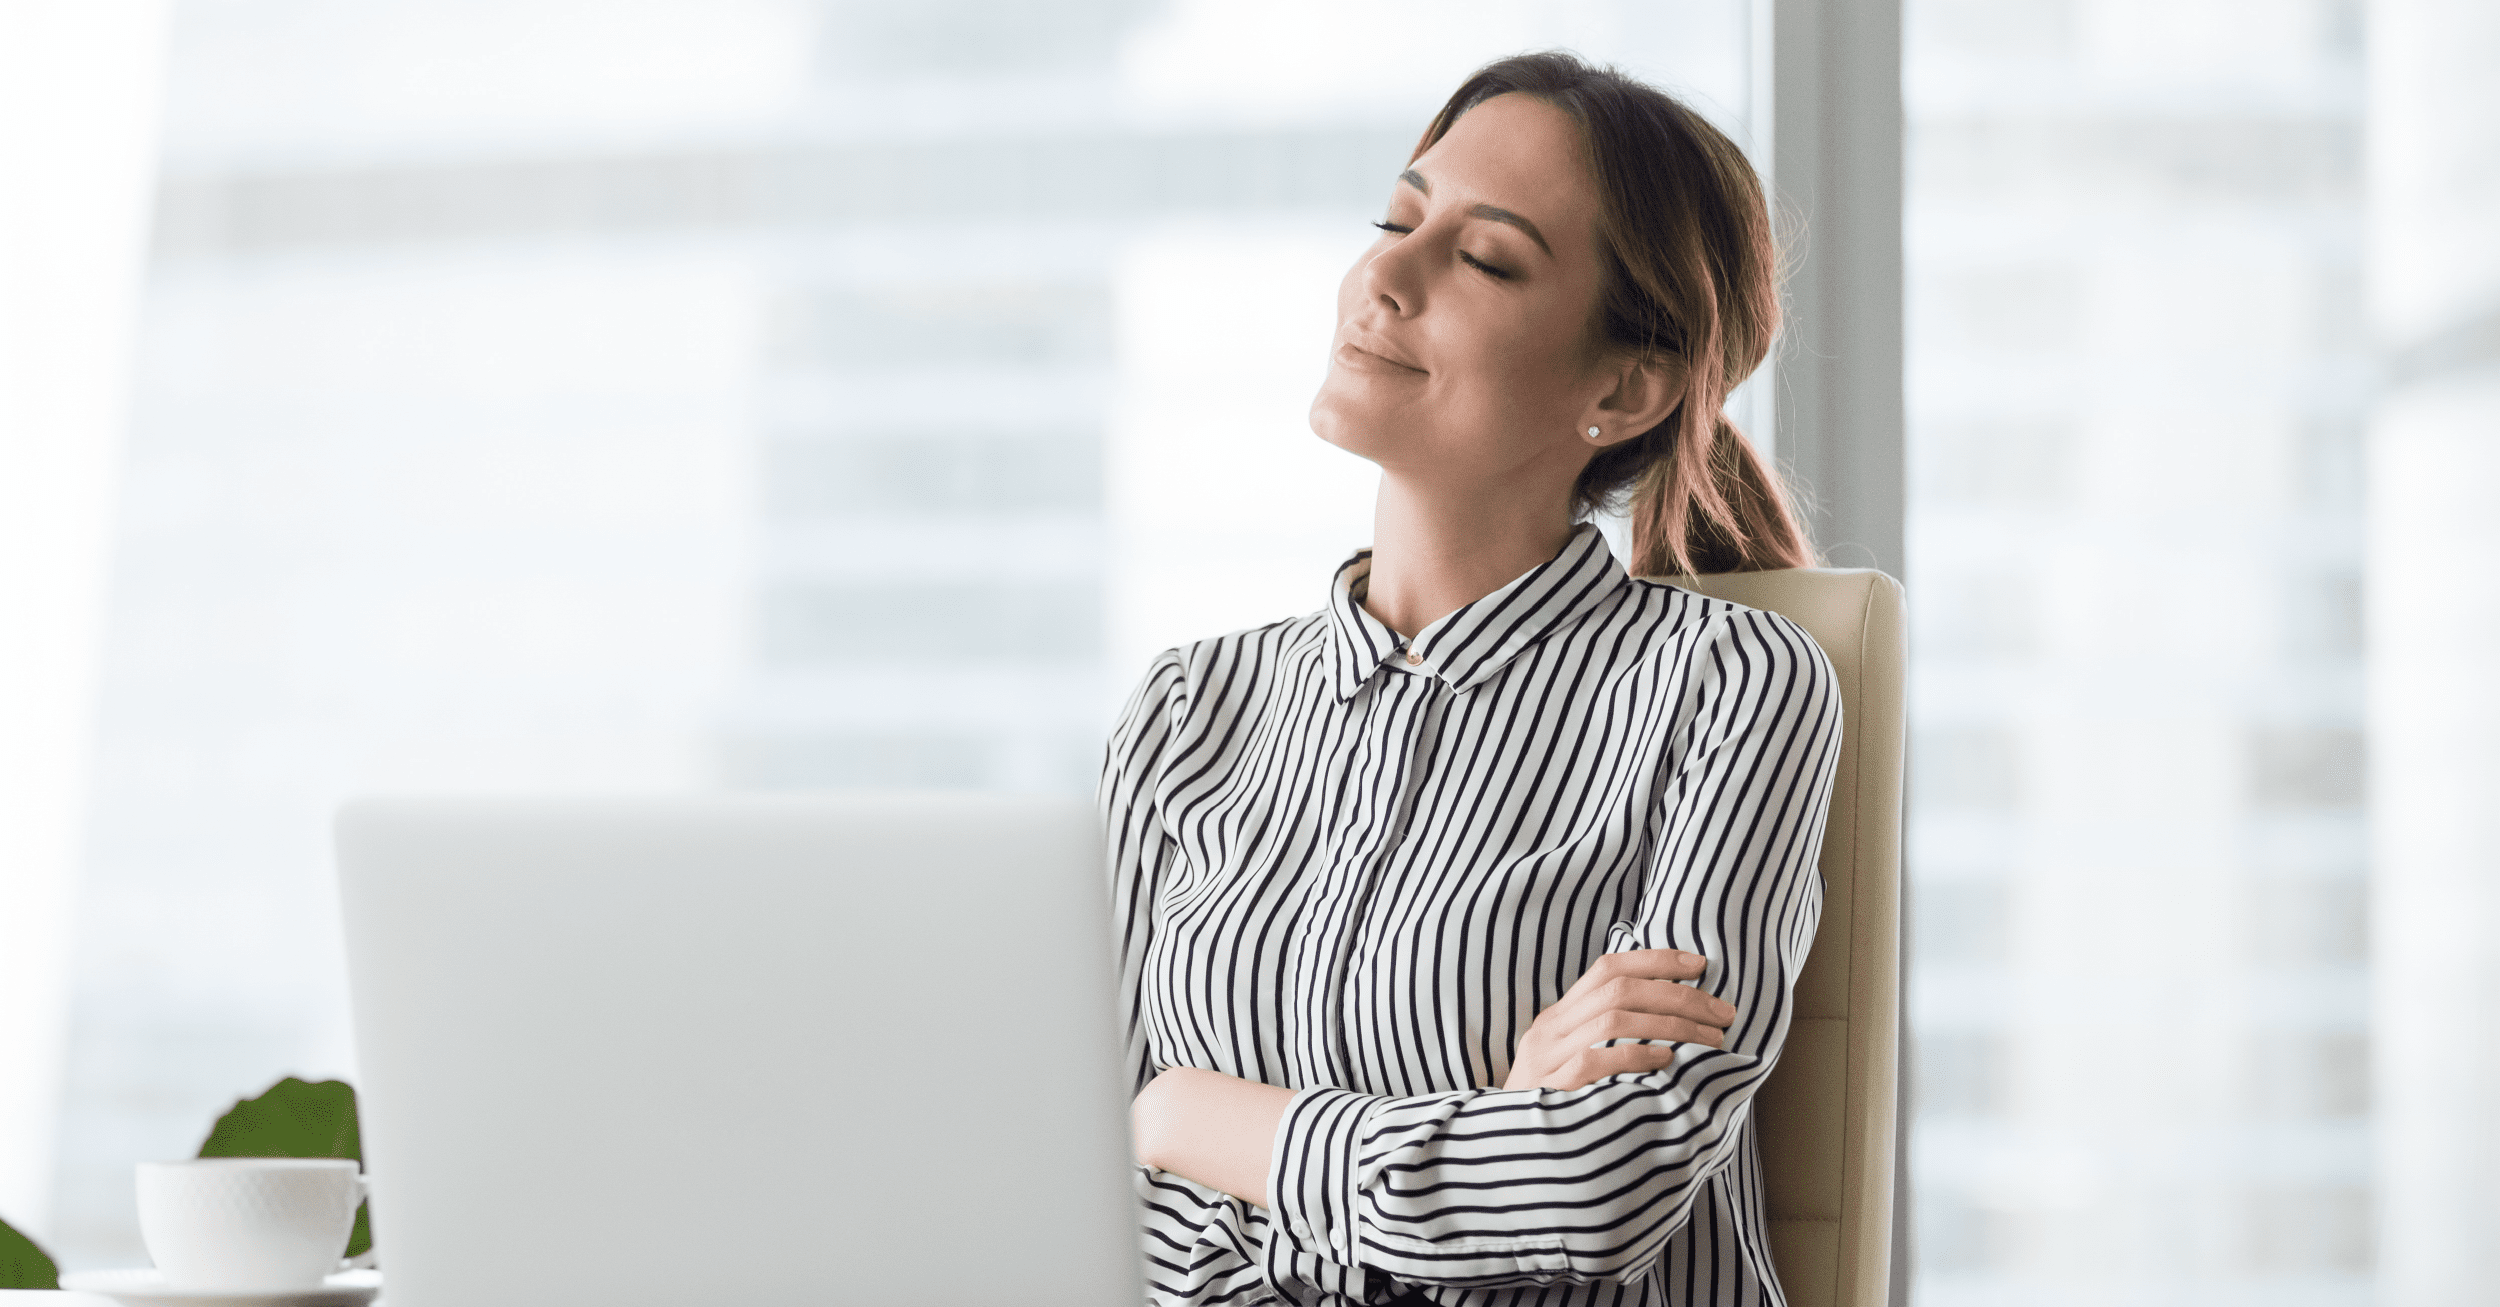 Businesswoman Sitting in Office Chair Relaxing With Eyes Closed